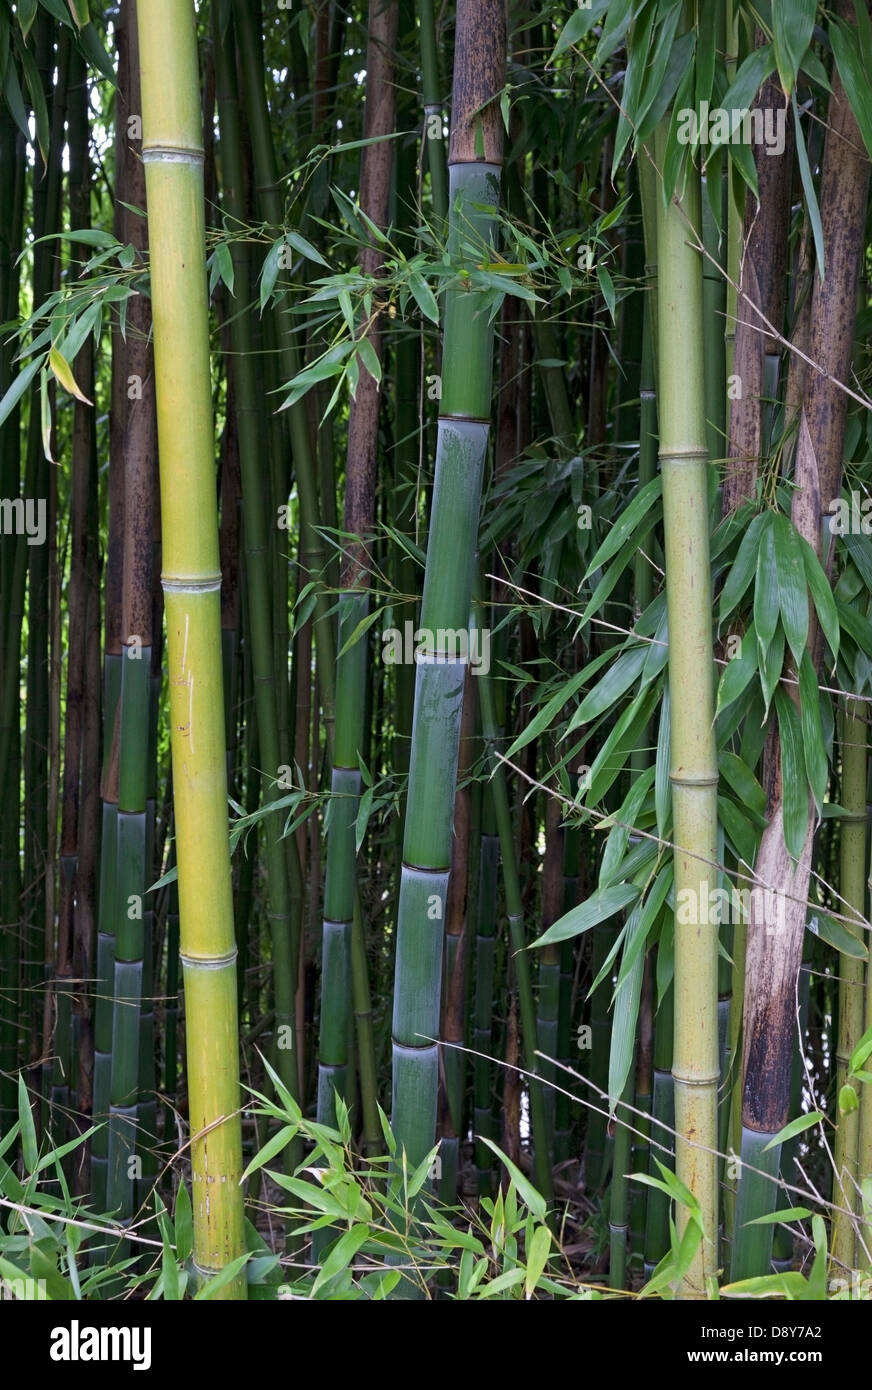 Dense Thicket of Bamboo Stems Stock Photo